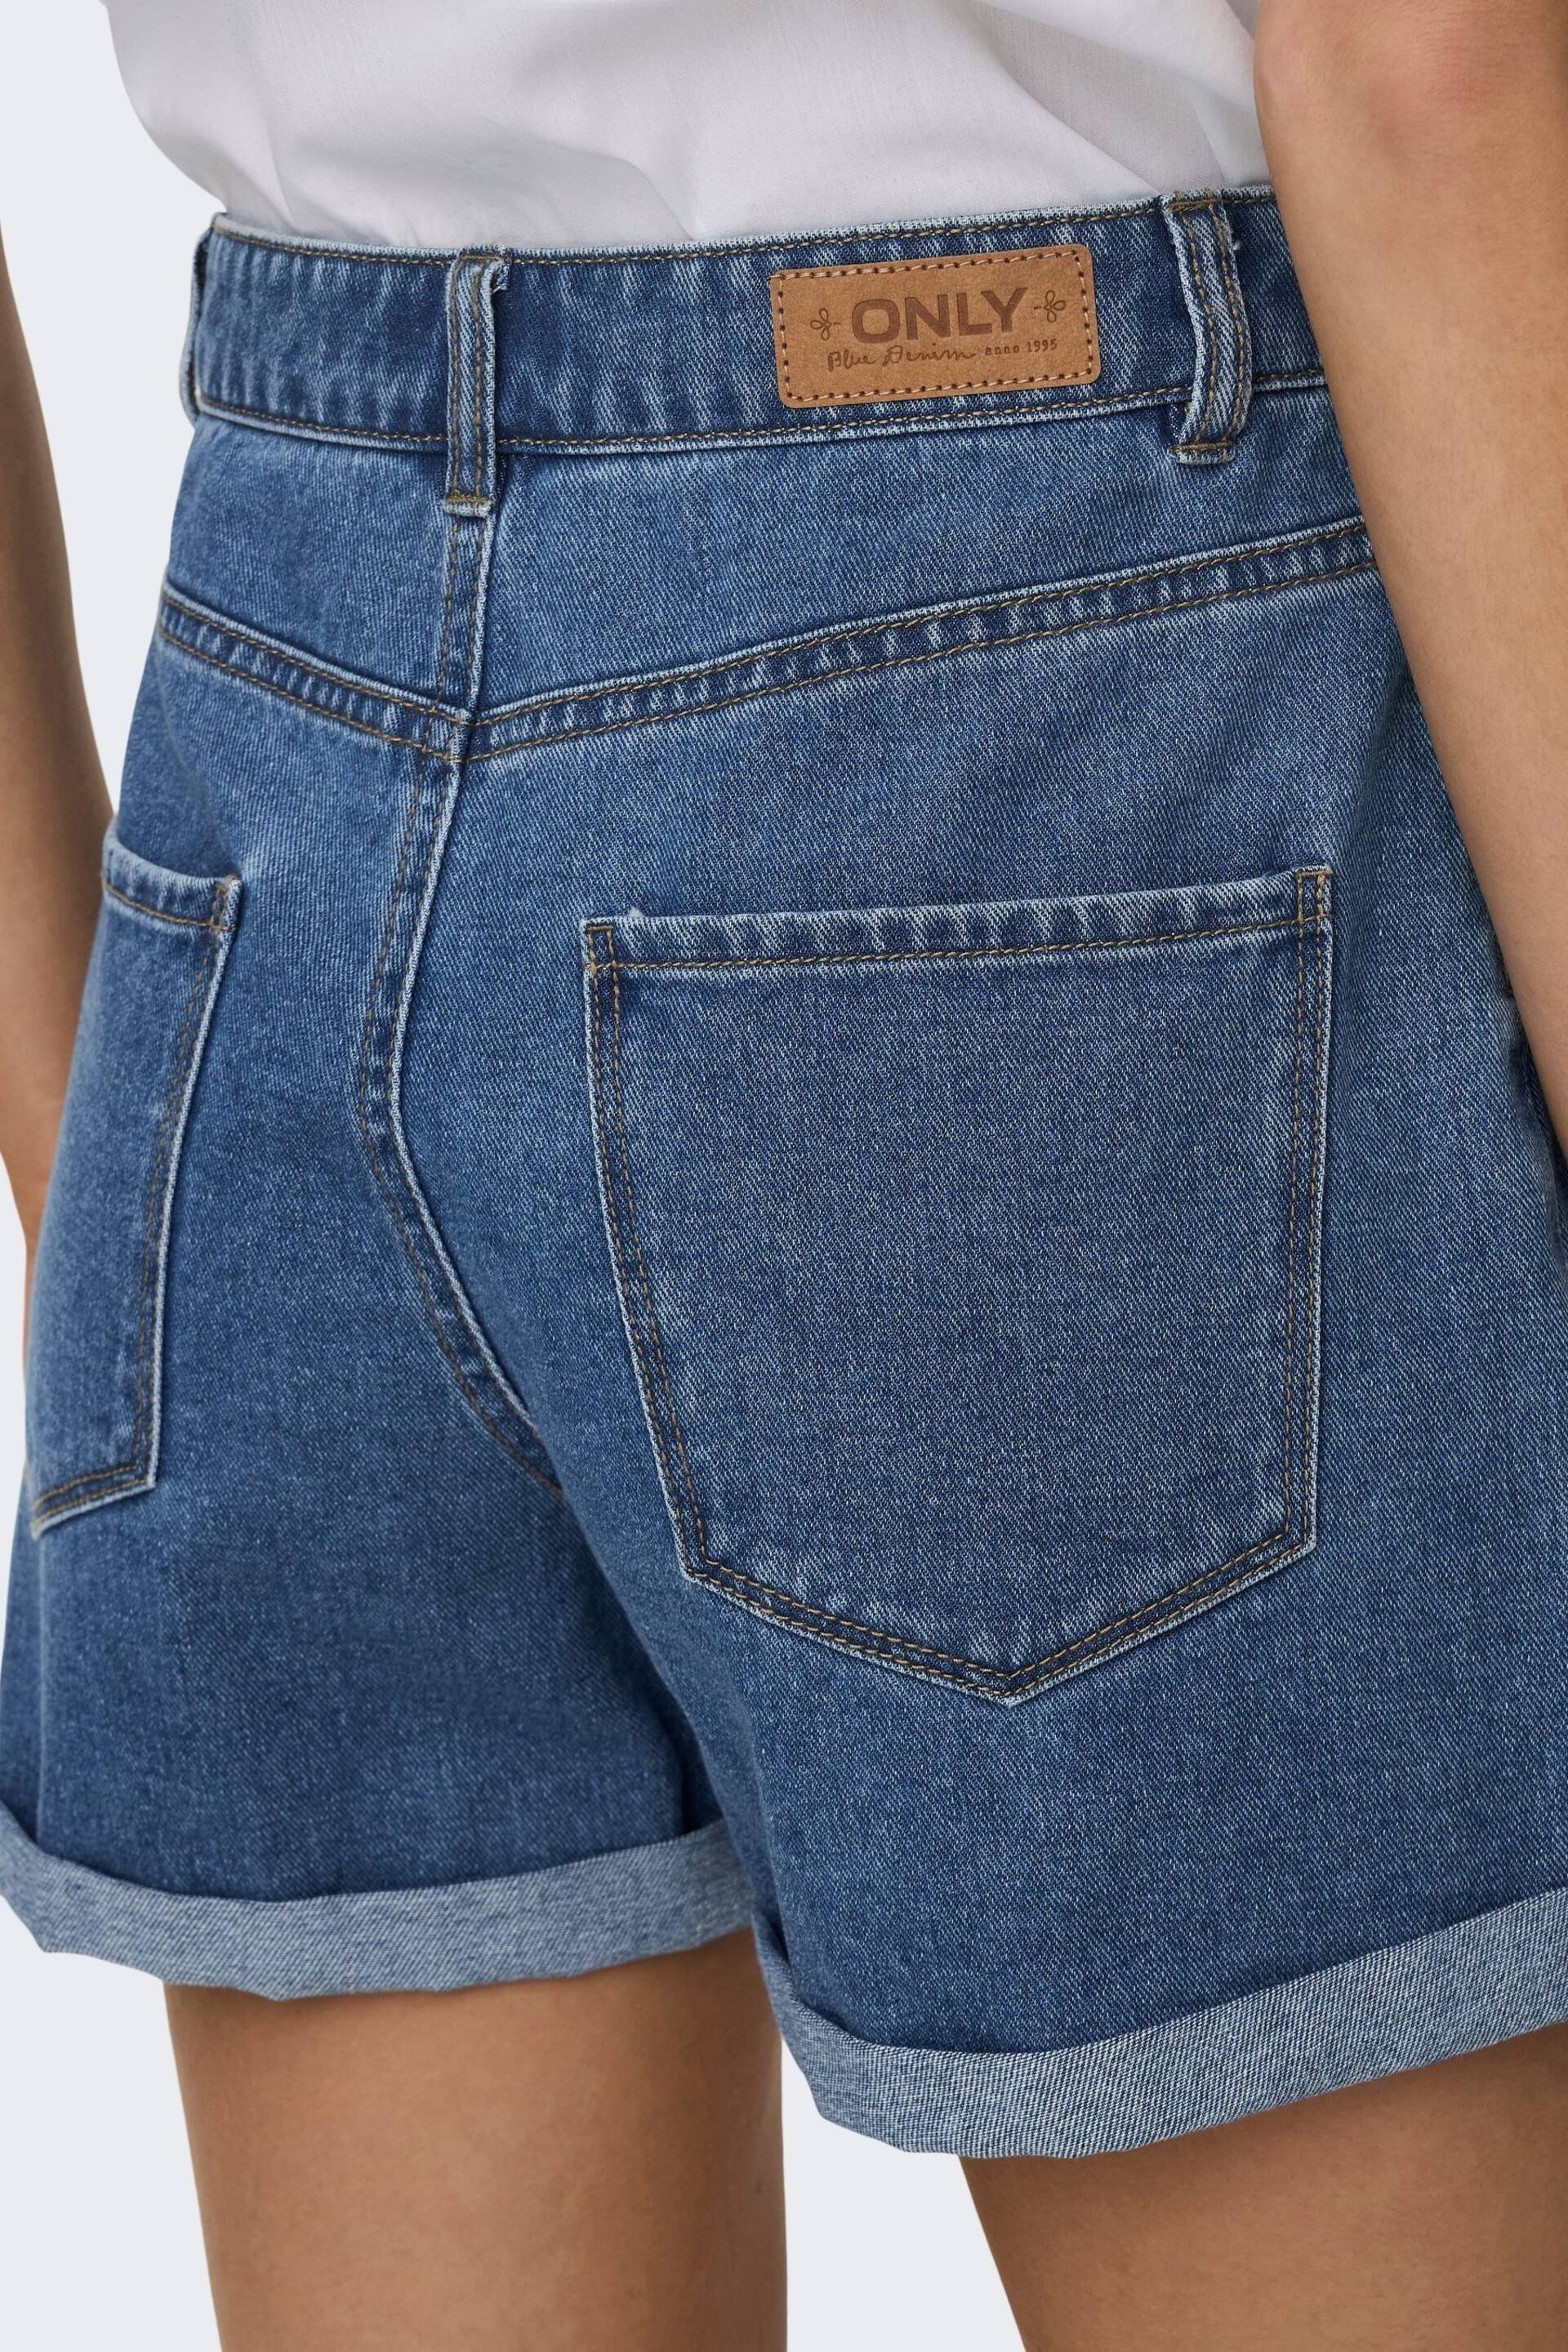 ONLY Mid Blue High Waisted Denim Mom Shorts - Image 3 of 7